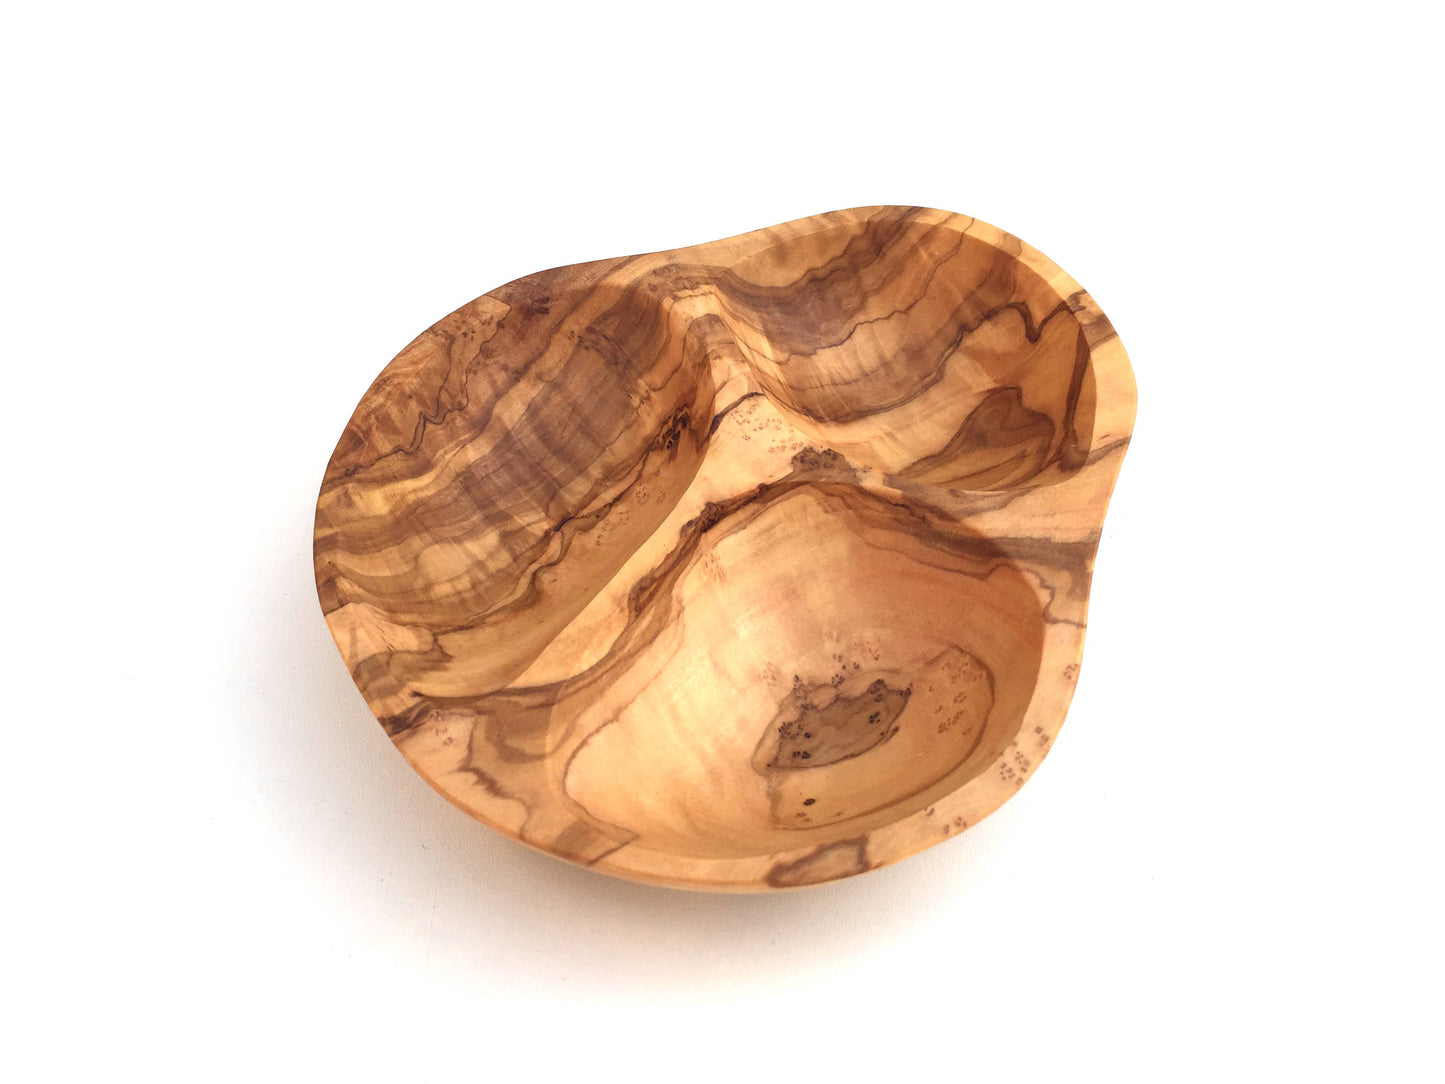 3 compartment olive wood serving bowl